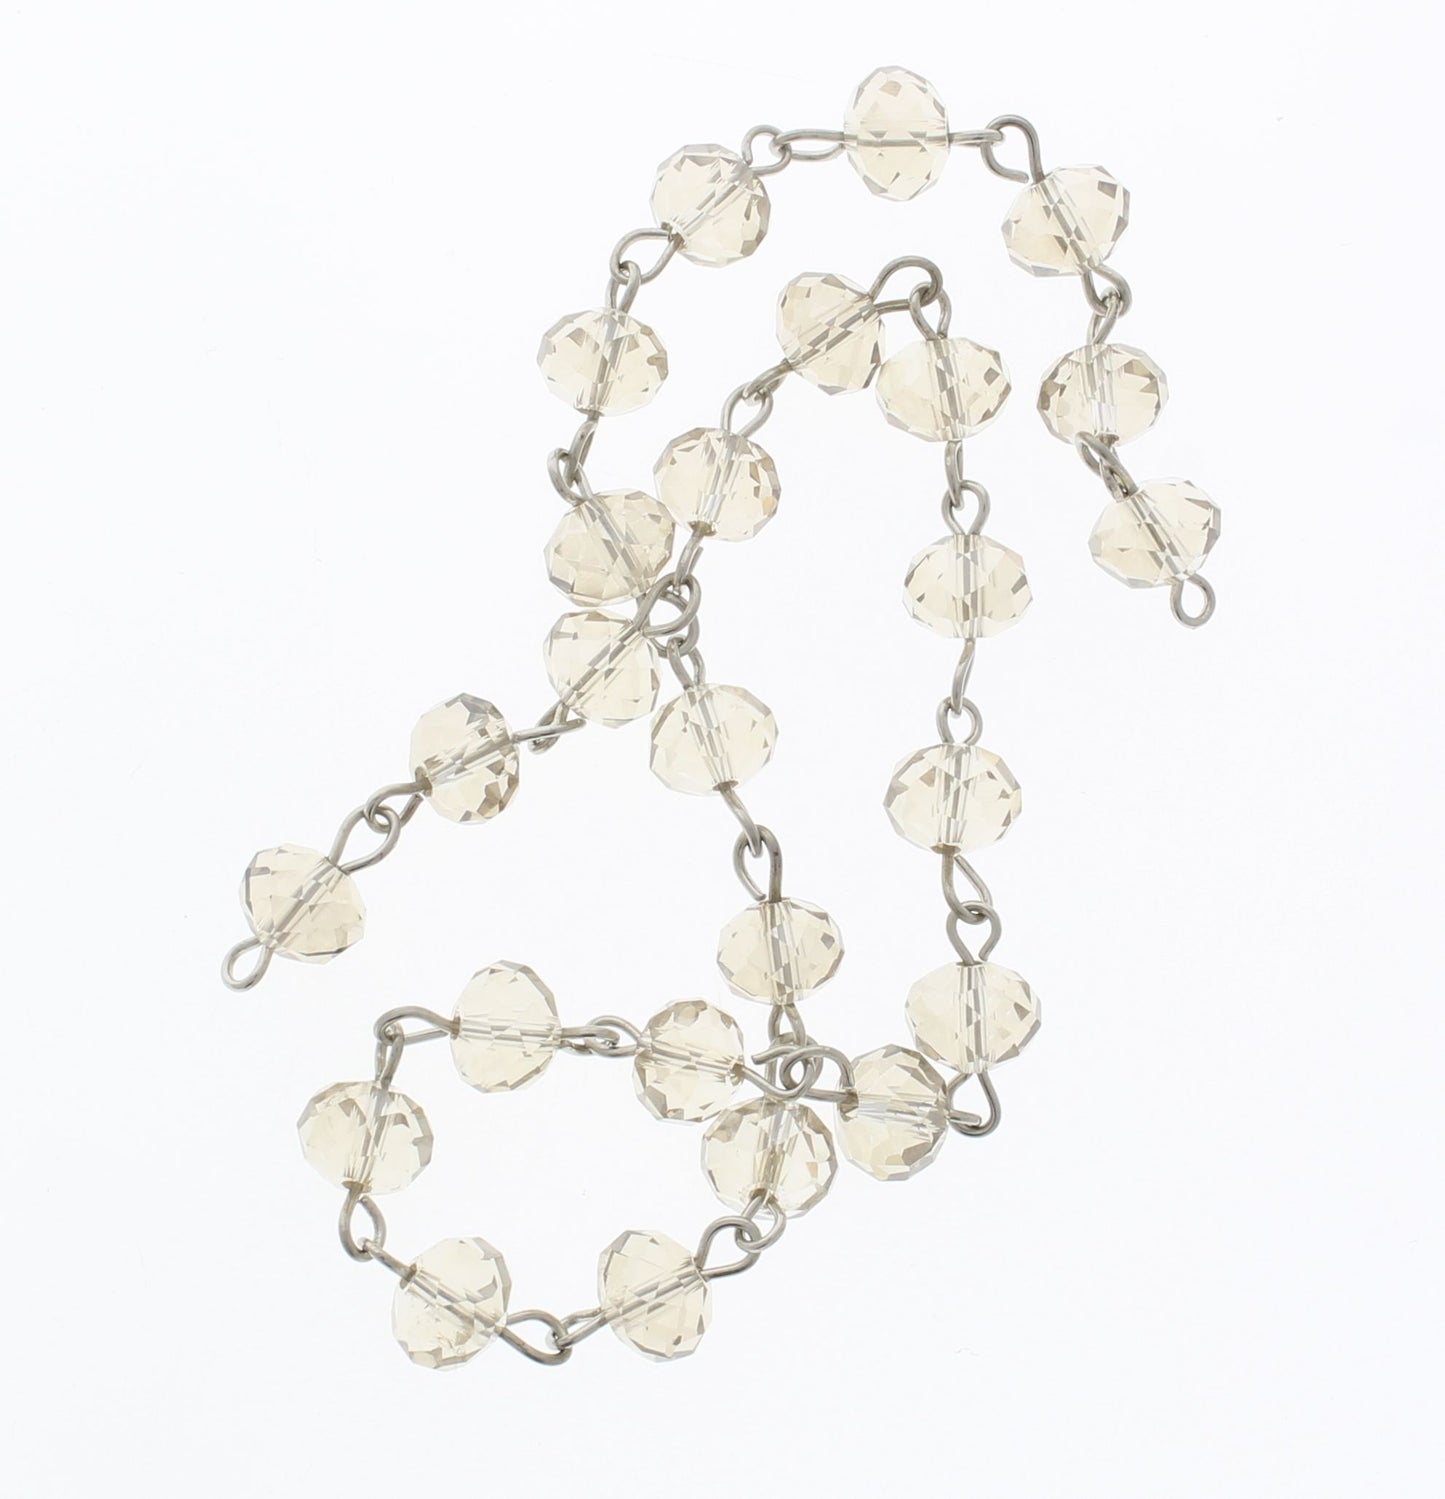 8mm Light Topaz beaded link rosary chain, sold per foot